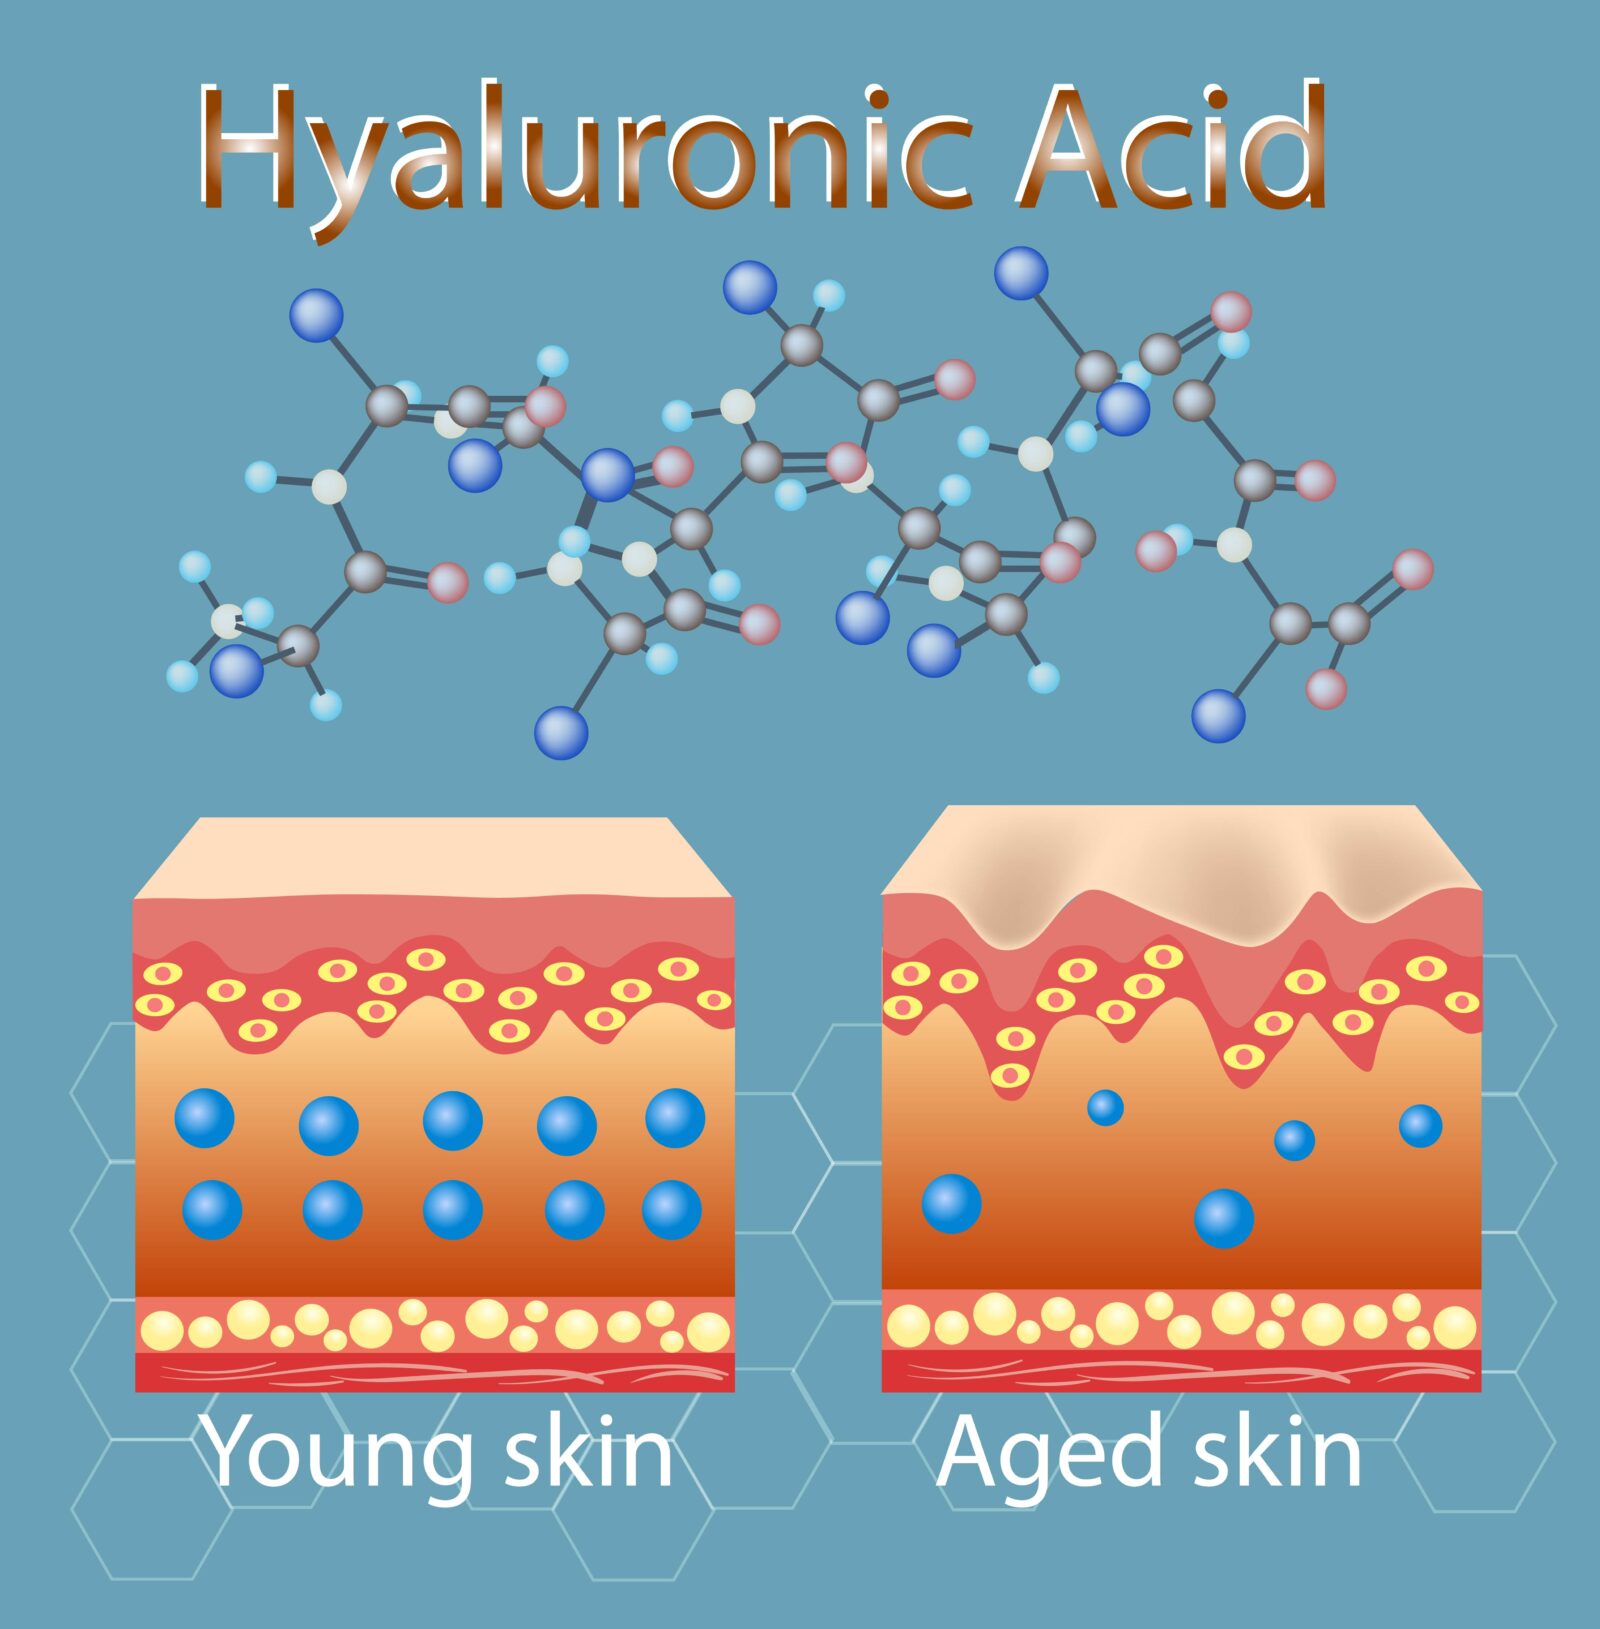 molecular structure of hyaluronic acid and how it affects the skin